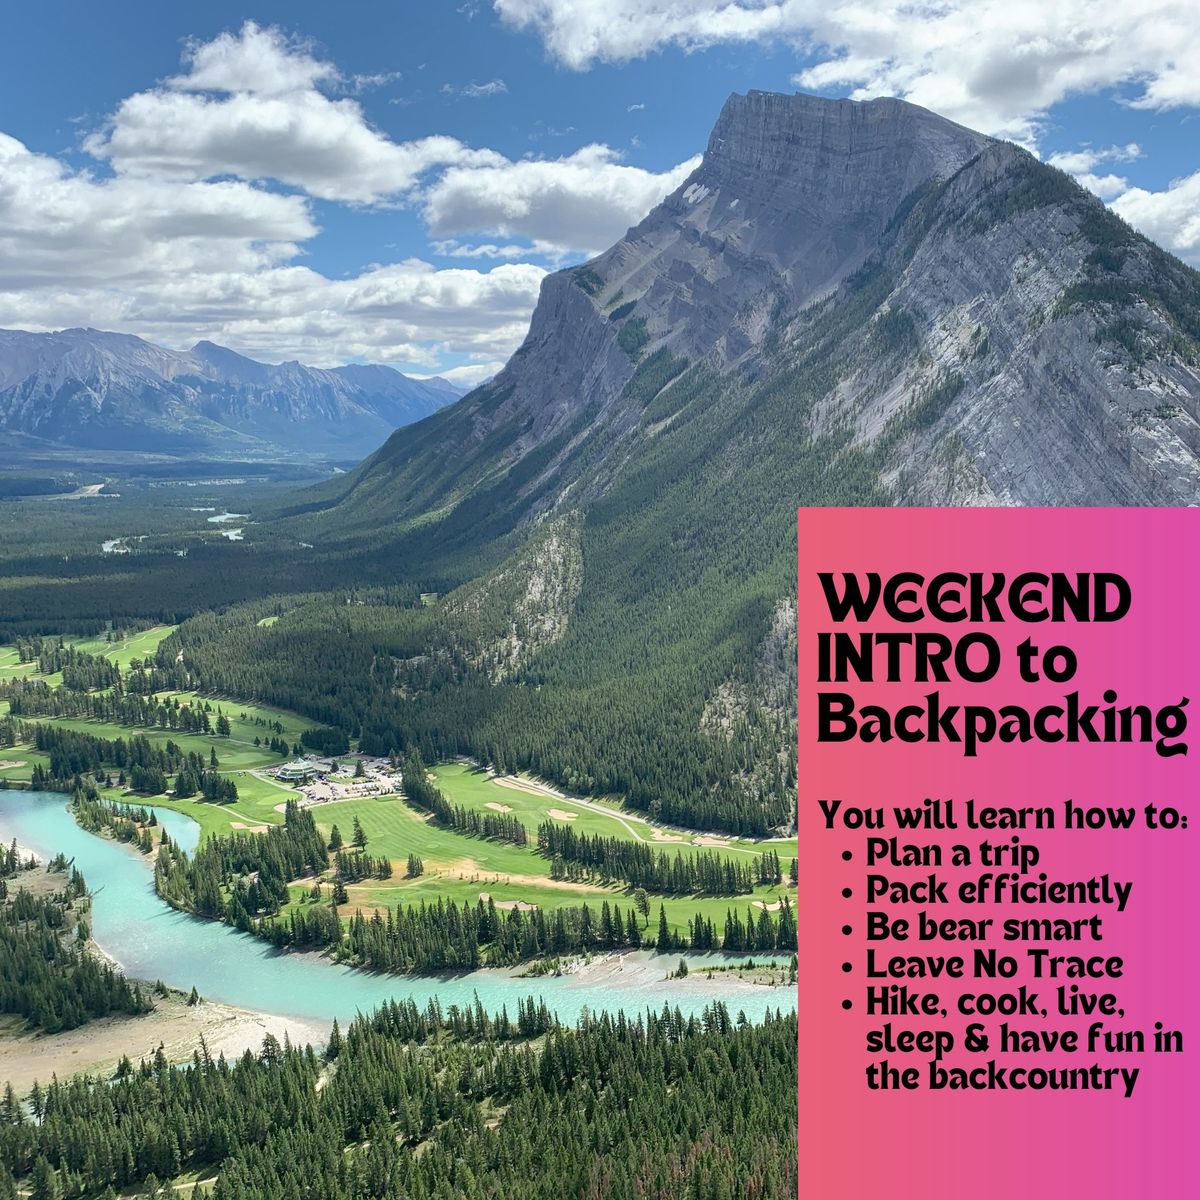 Weekend Intro to Backpacking with day hikes!